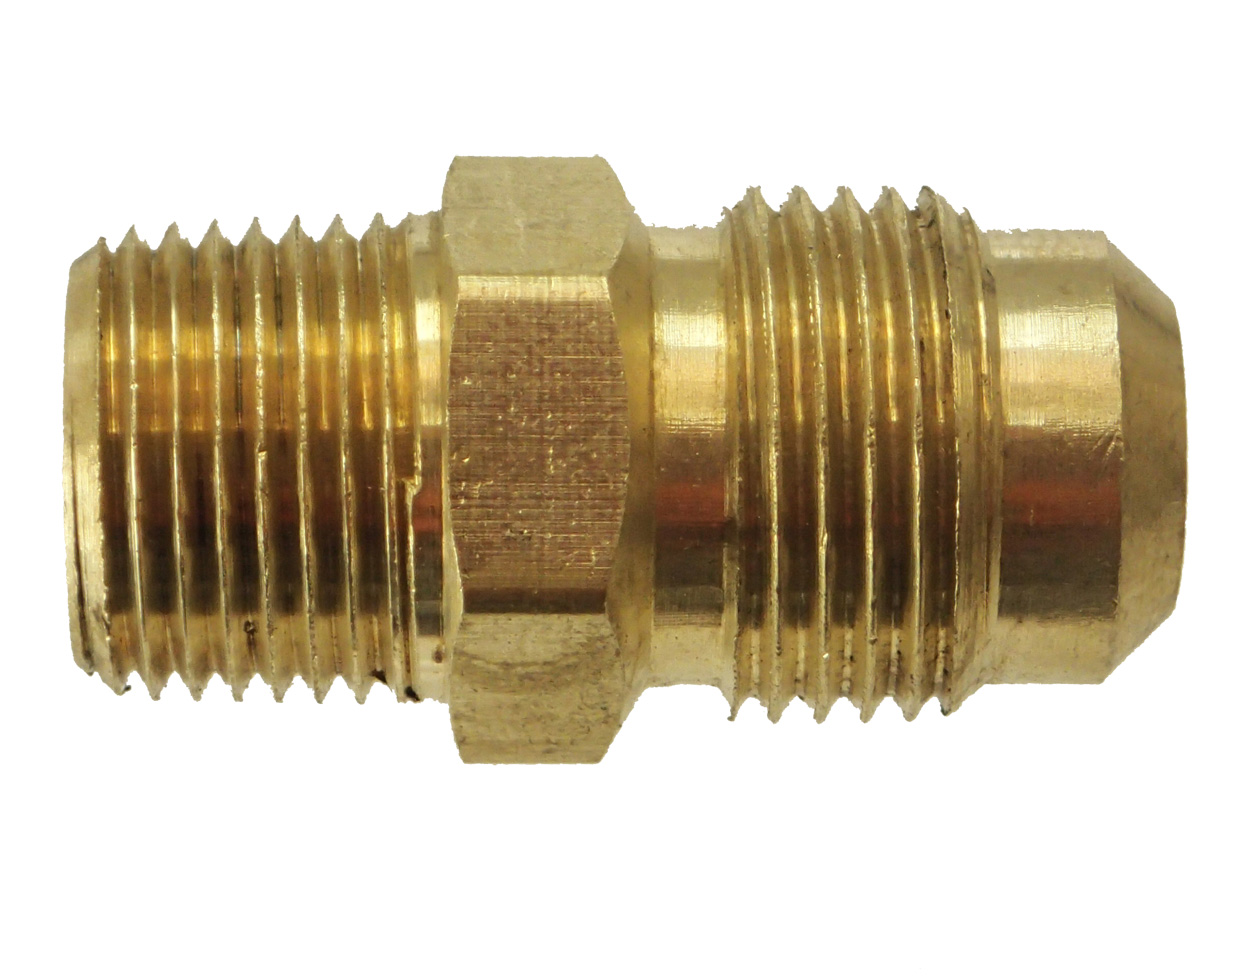 Details about   REF; # 20-24 FTX-S 1-1/2" NPT 1-1/4" 37° JIC FLARE MALE CONNECTOR STEEL NNB 